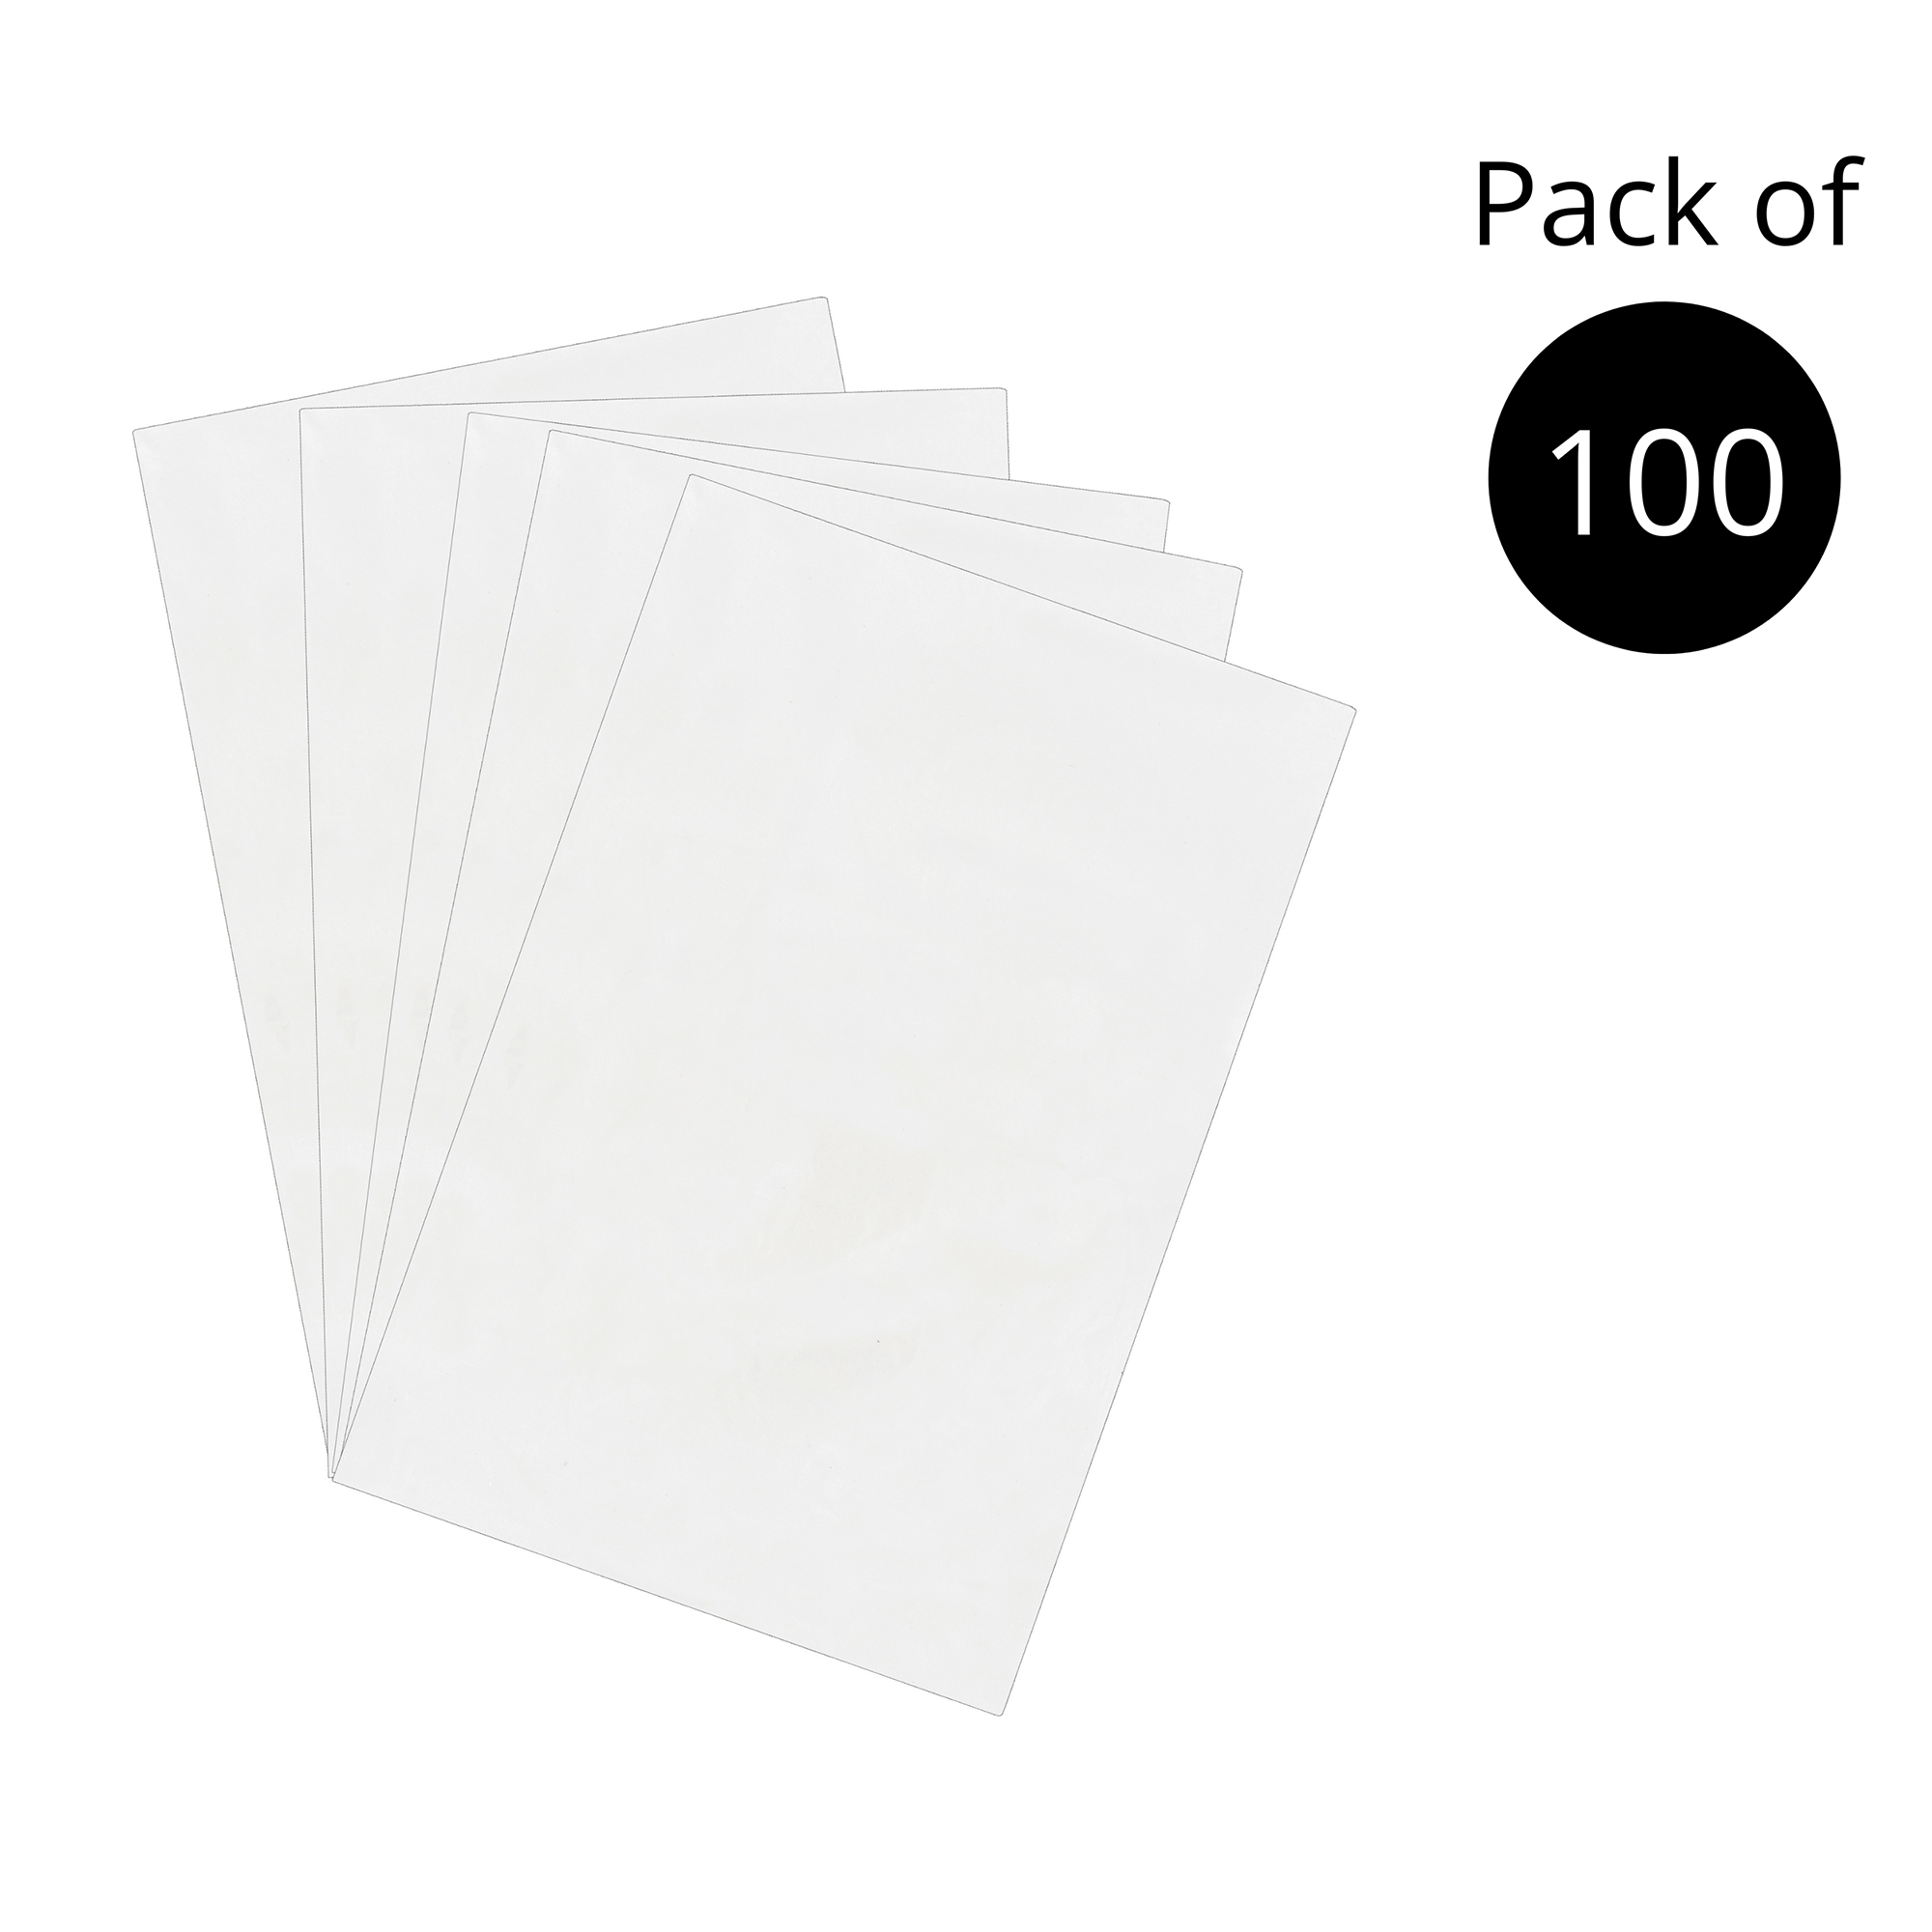 InfinitePack 100 CT 12x18 inches 1 Mil Clear Plastic Flat Open Poly Bags Great for Food, Storage, Packaging, and More - Infinite Pack